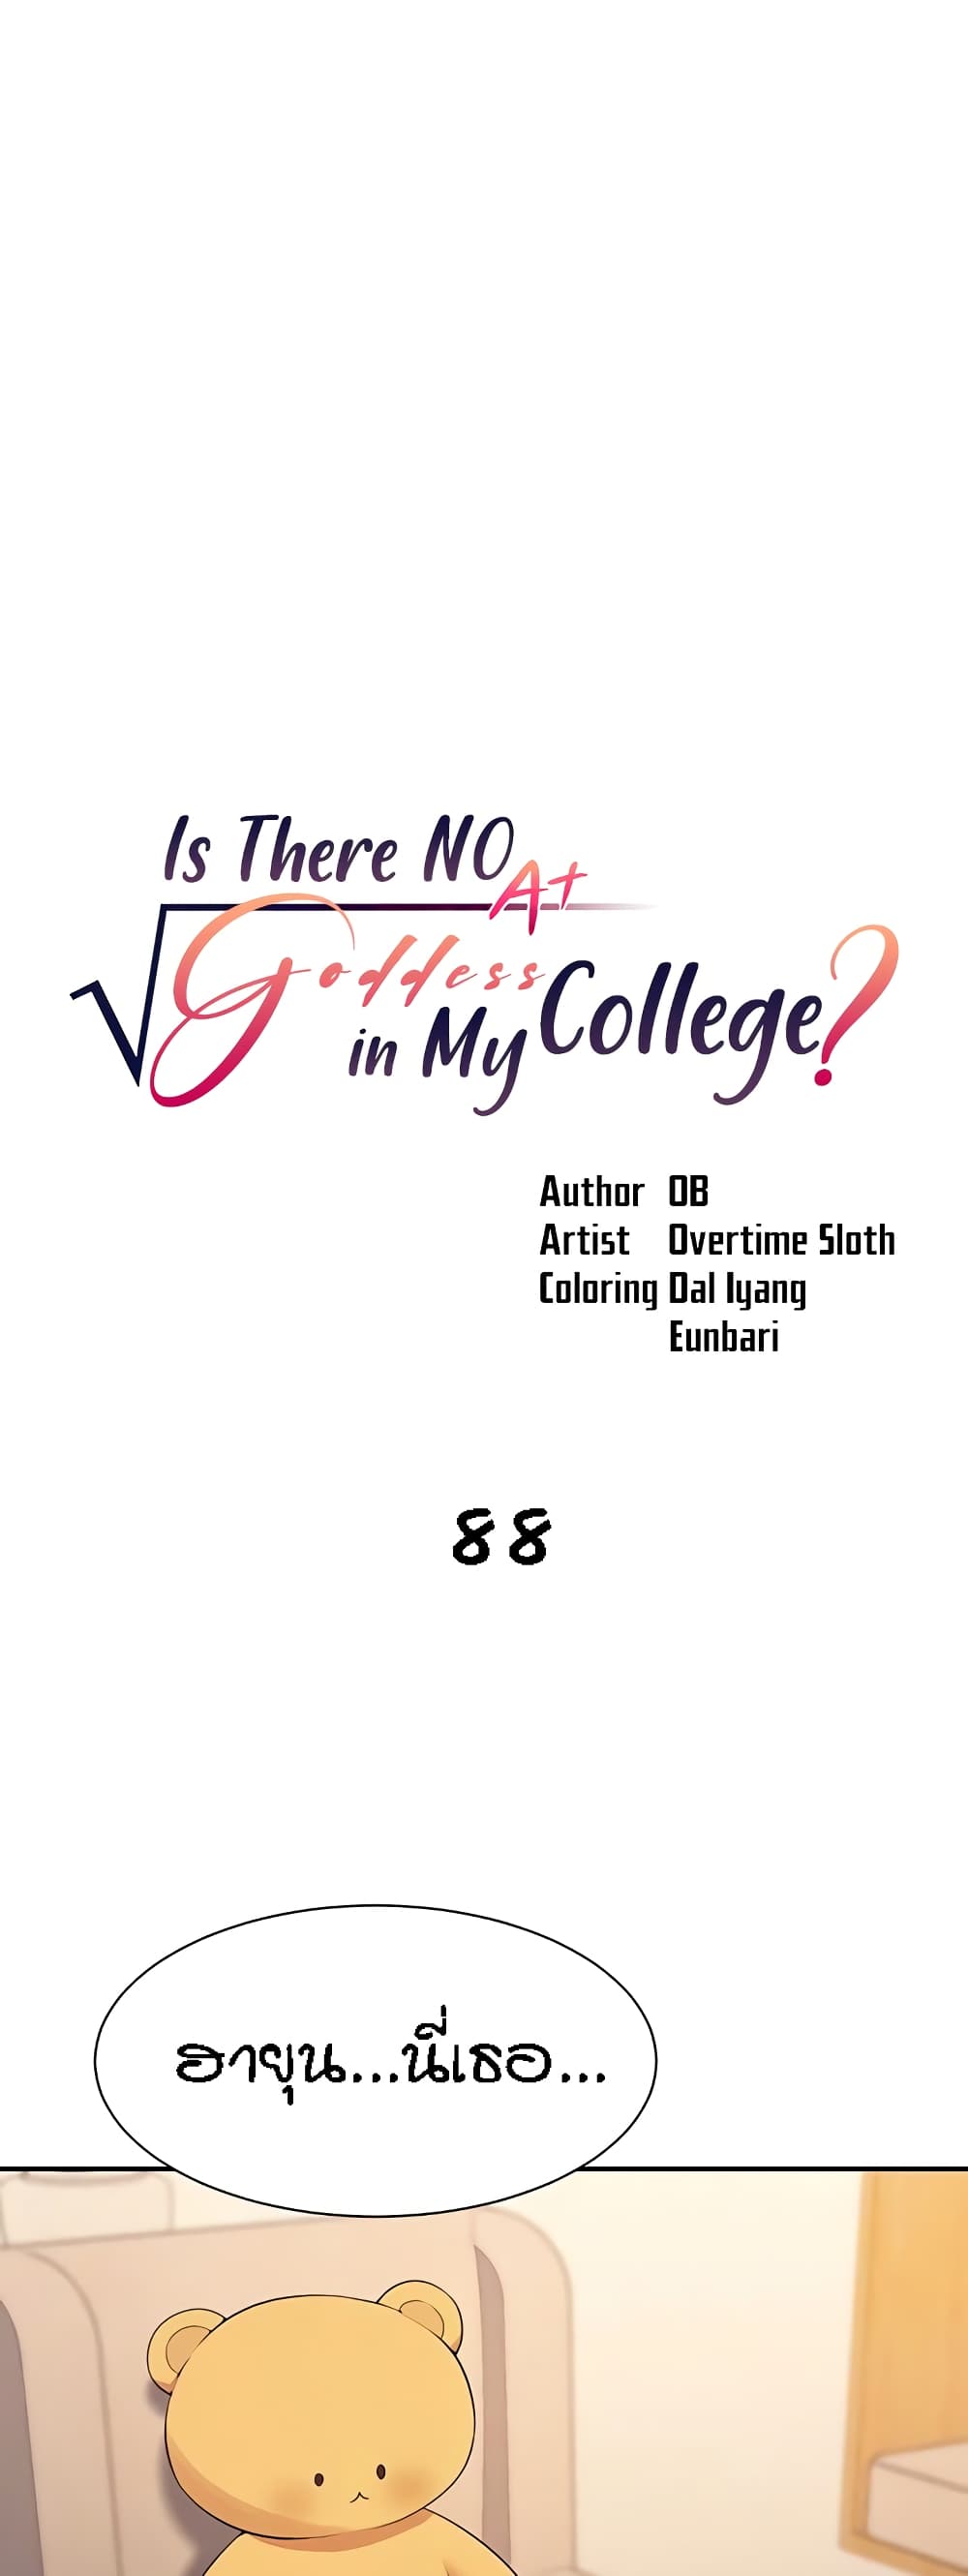 Is There No Goddess in My College? 88-88